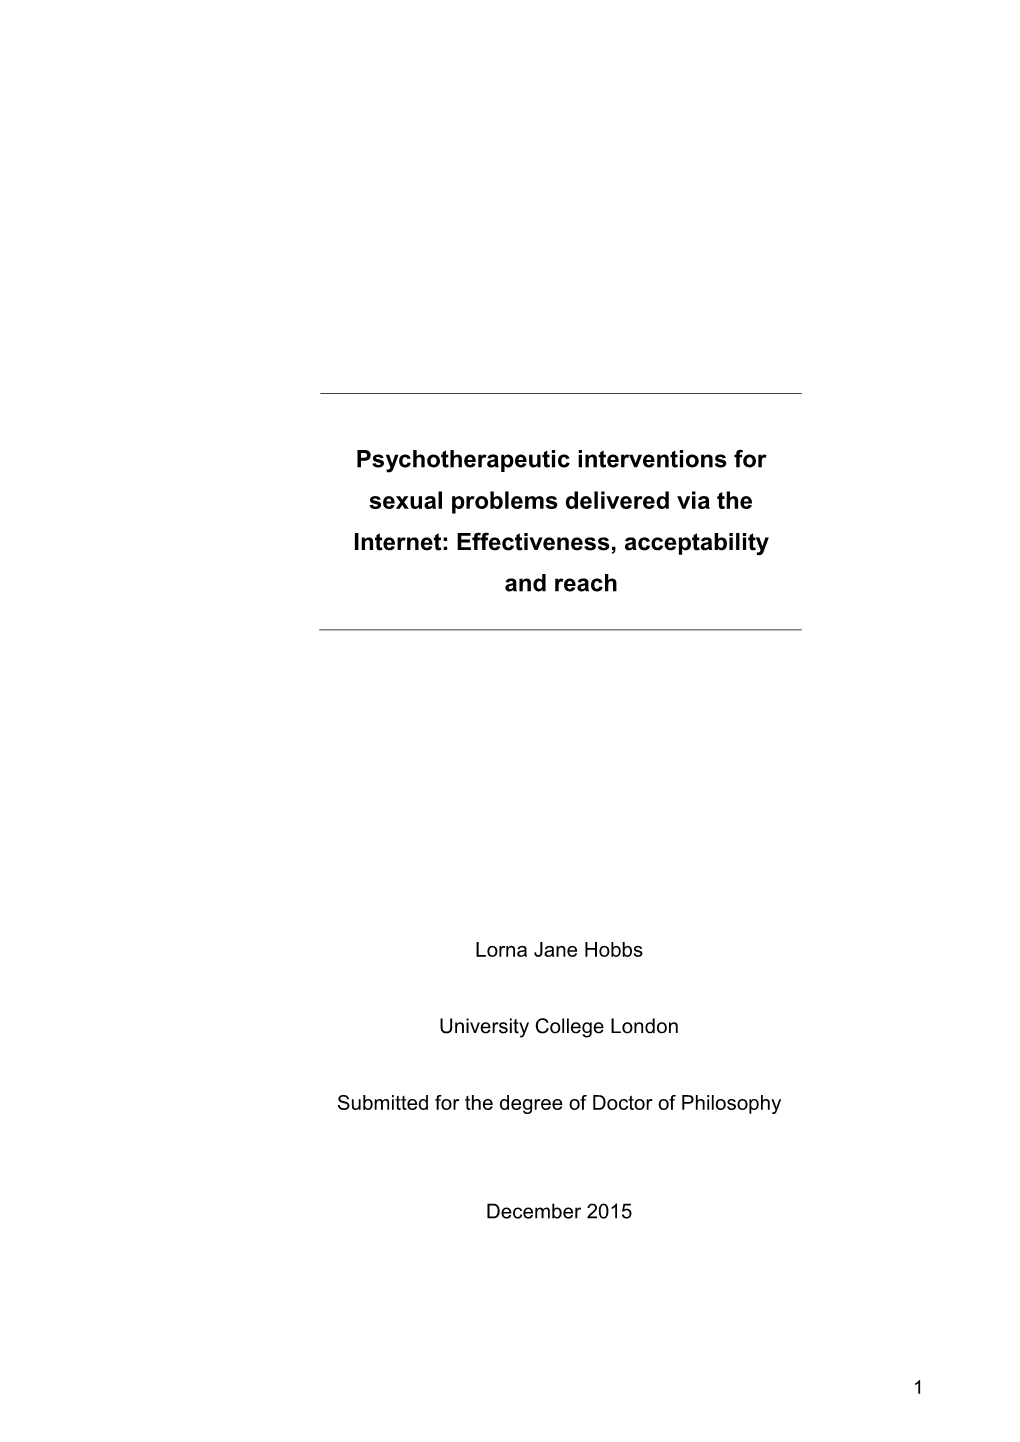 Psychotherapeutic Interventions for Sexual Problems Delivered Via the Internet: Effectiveness, Acceptability